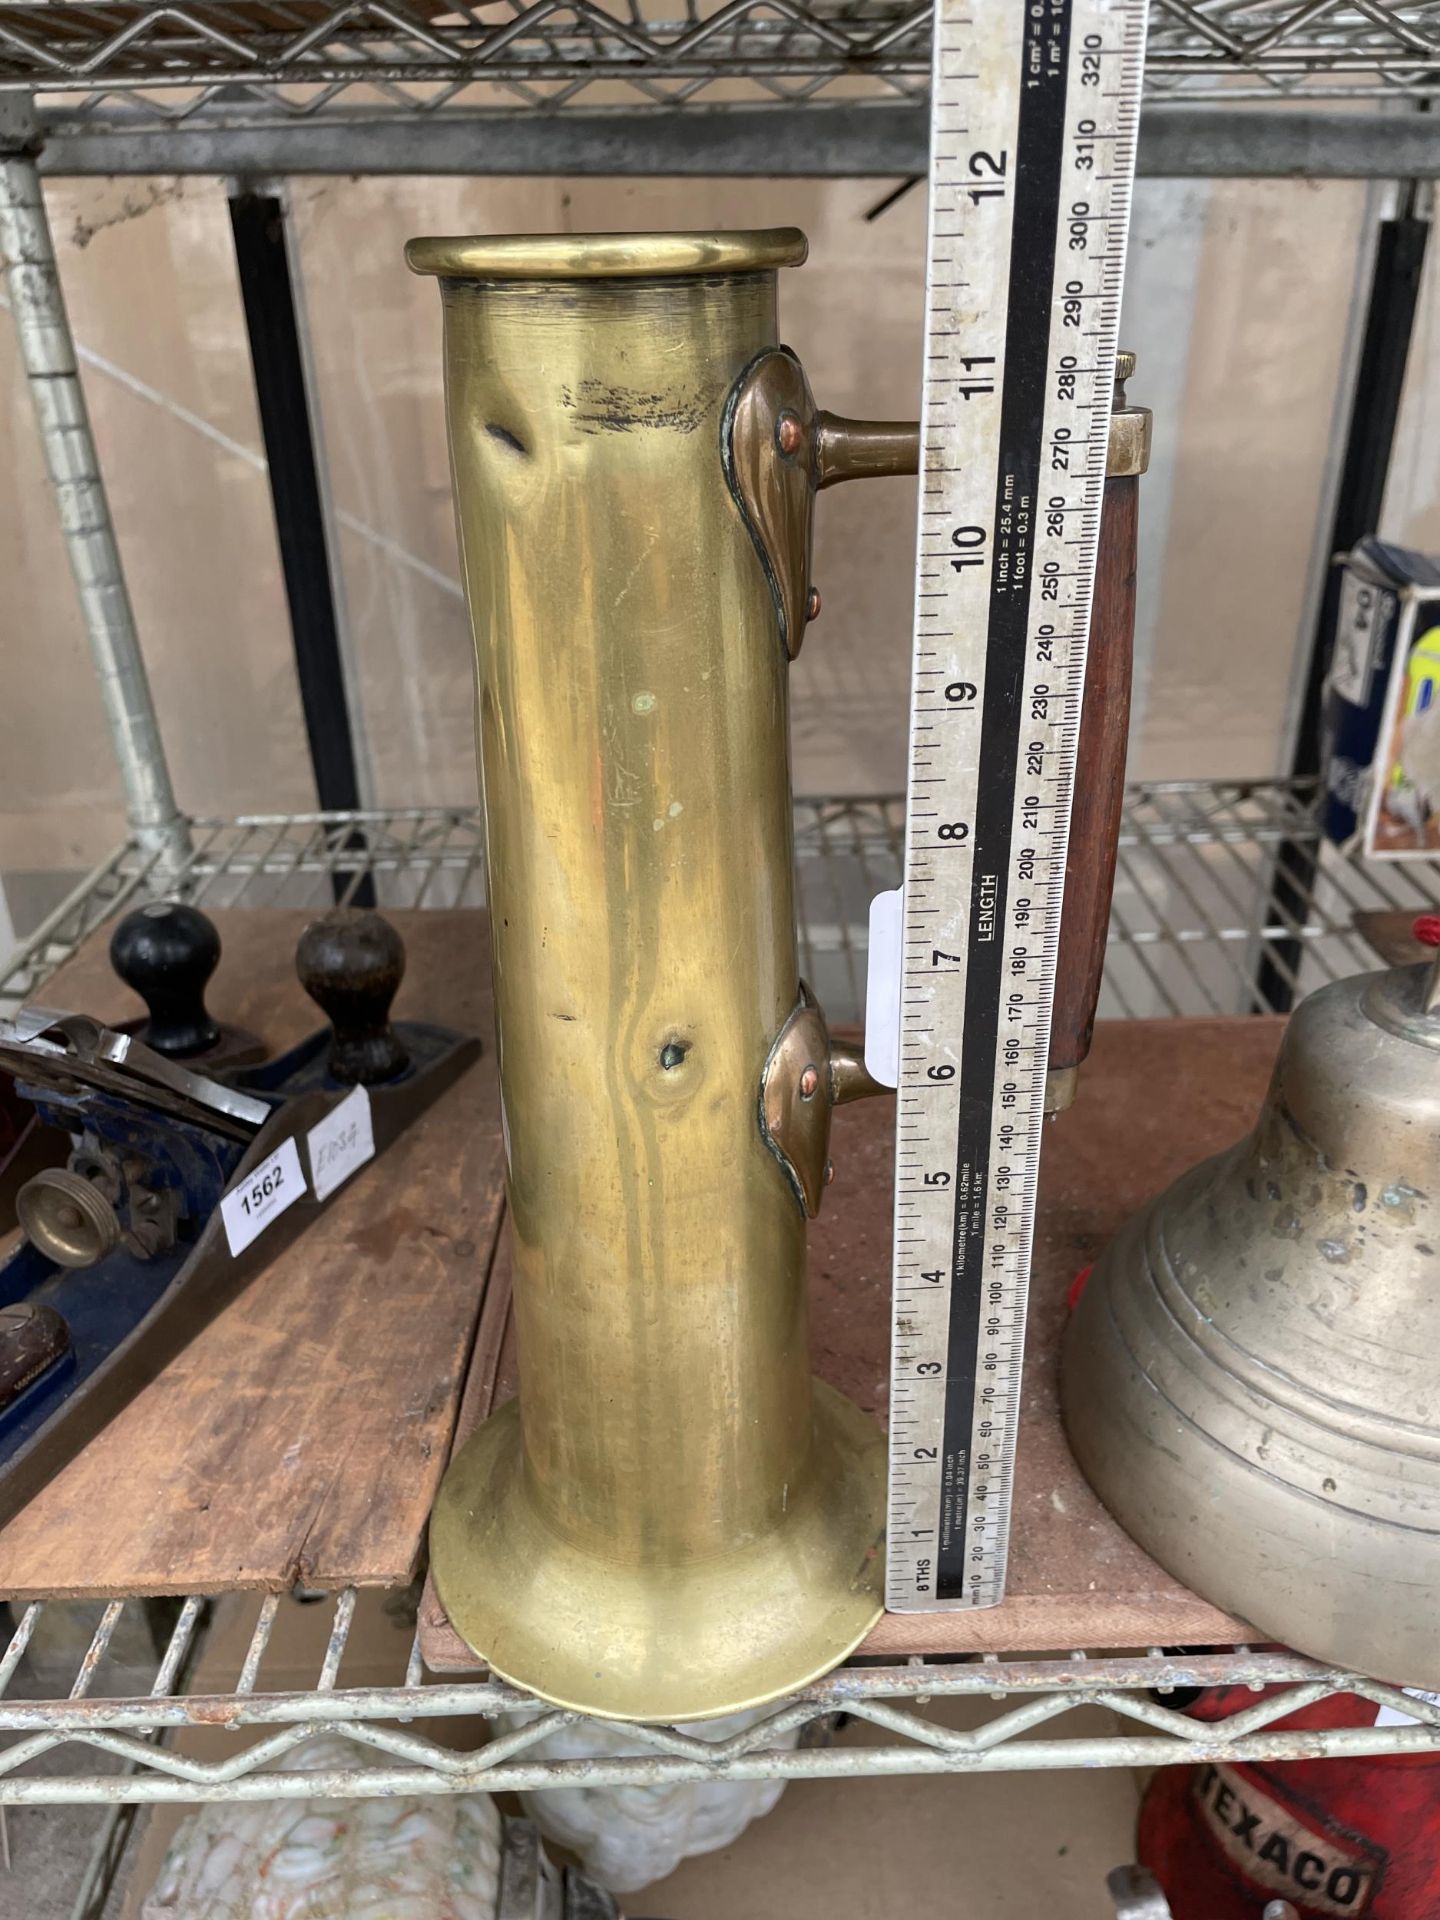 A VINTAGE BRASS STEAM SHIP TEST JUG WITH WOODEN HANDLE - Image 2 of 2